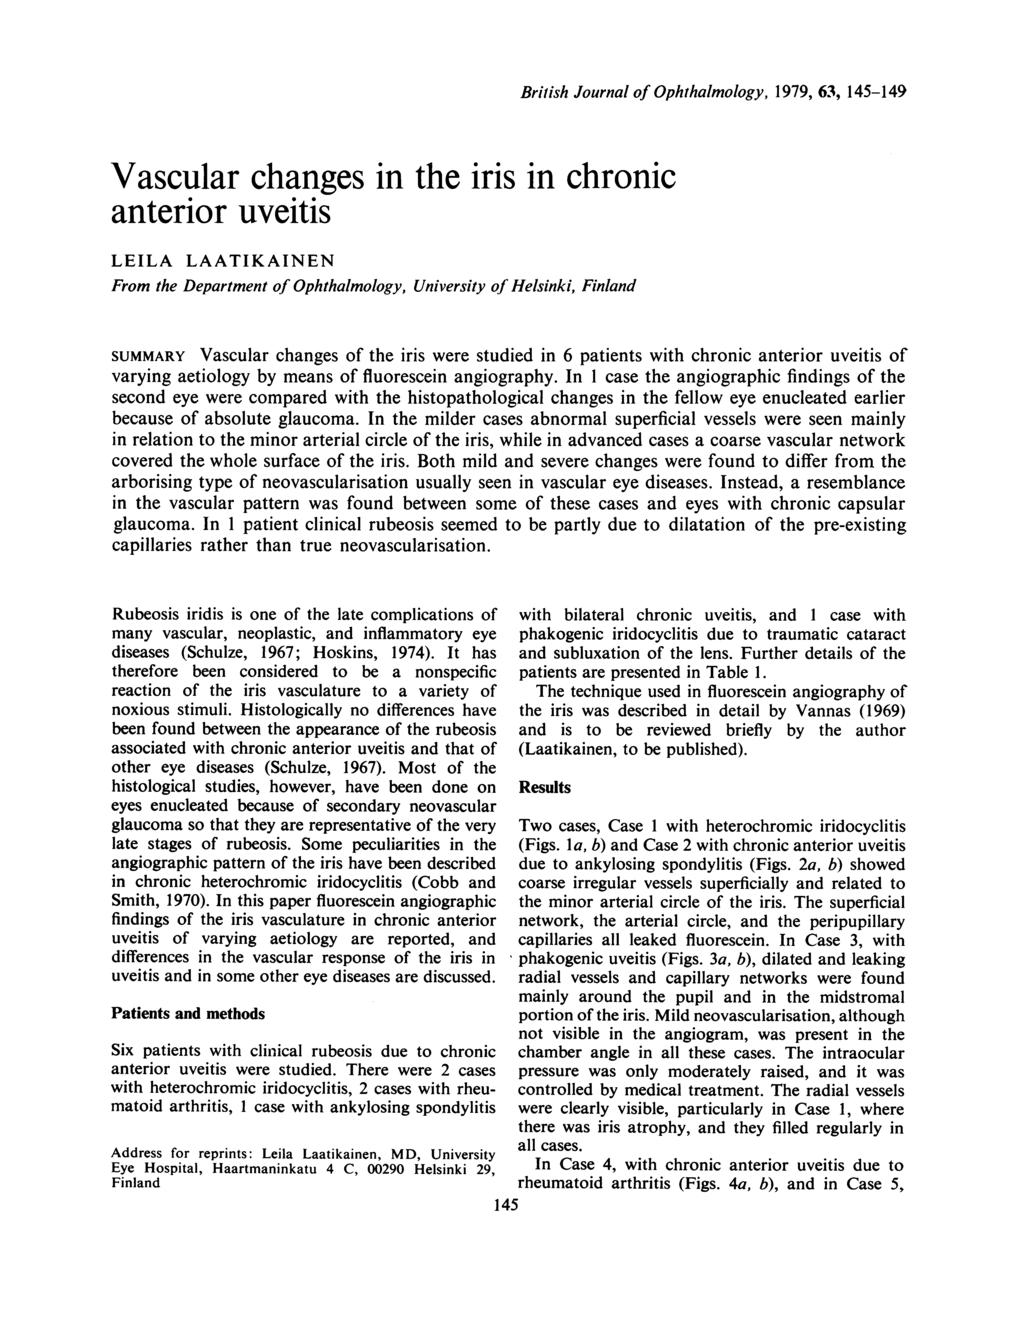 Vascular changes in the iris in chronic anterior uveitis LEILA LAATIKAINEN From the Department of Ophthalmology, University of Helsinki, Finland British Journal of Ophthalmology, 1979, 63, 145-149